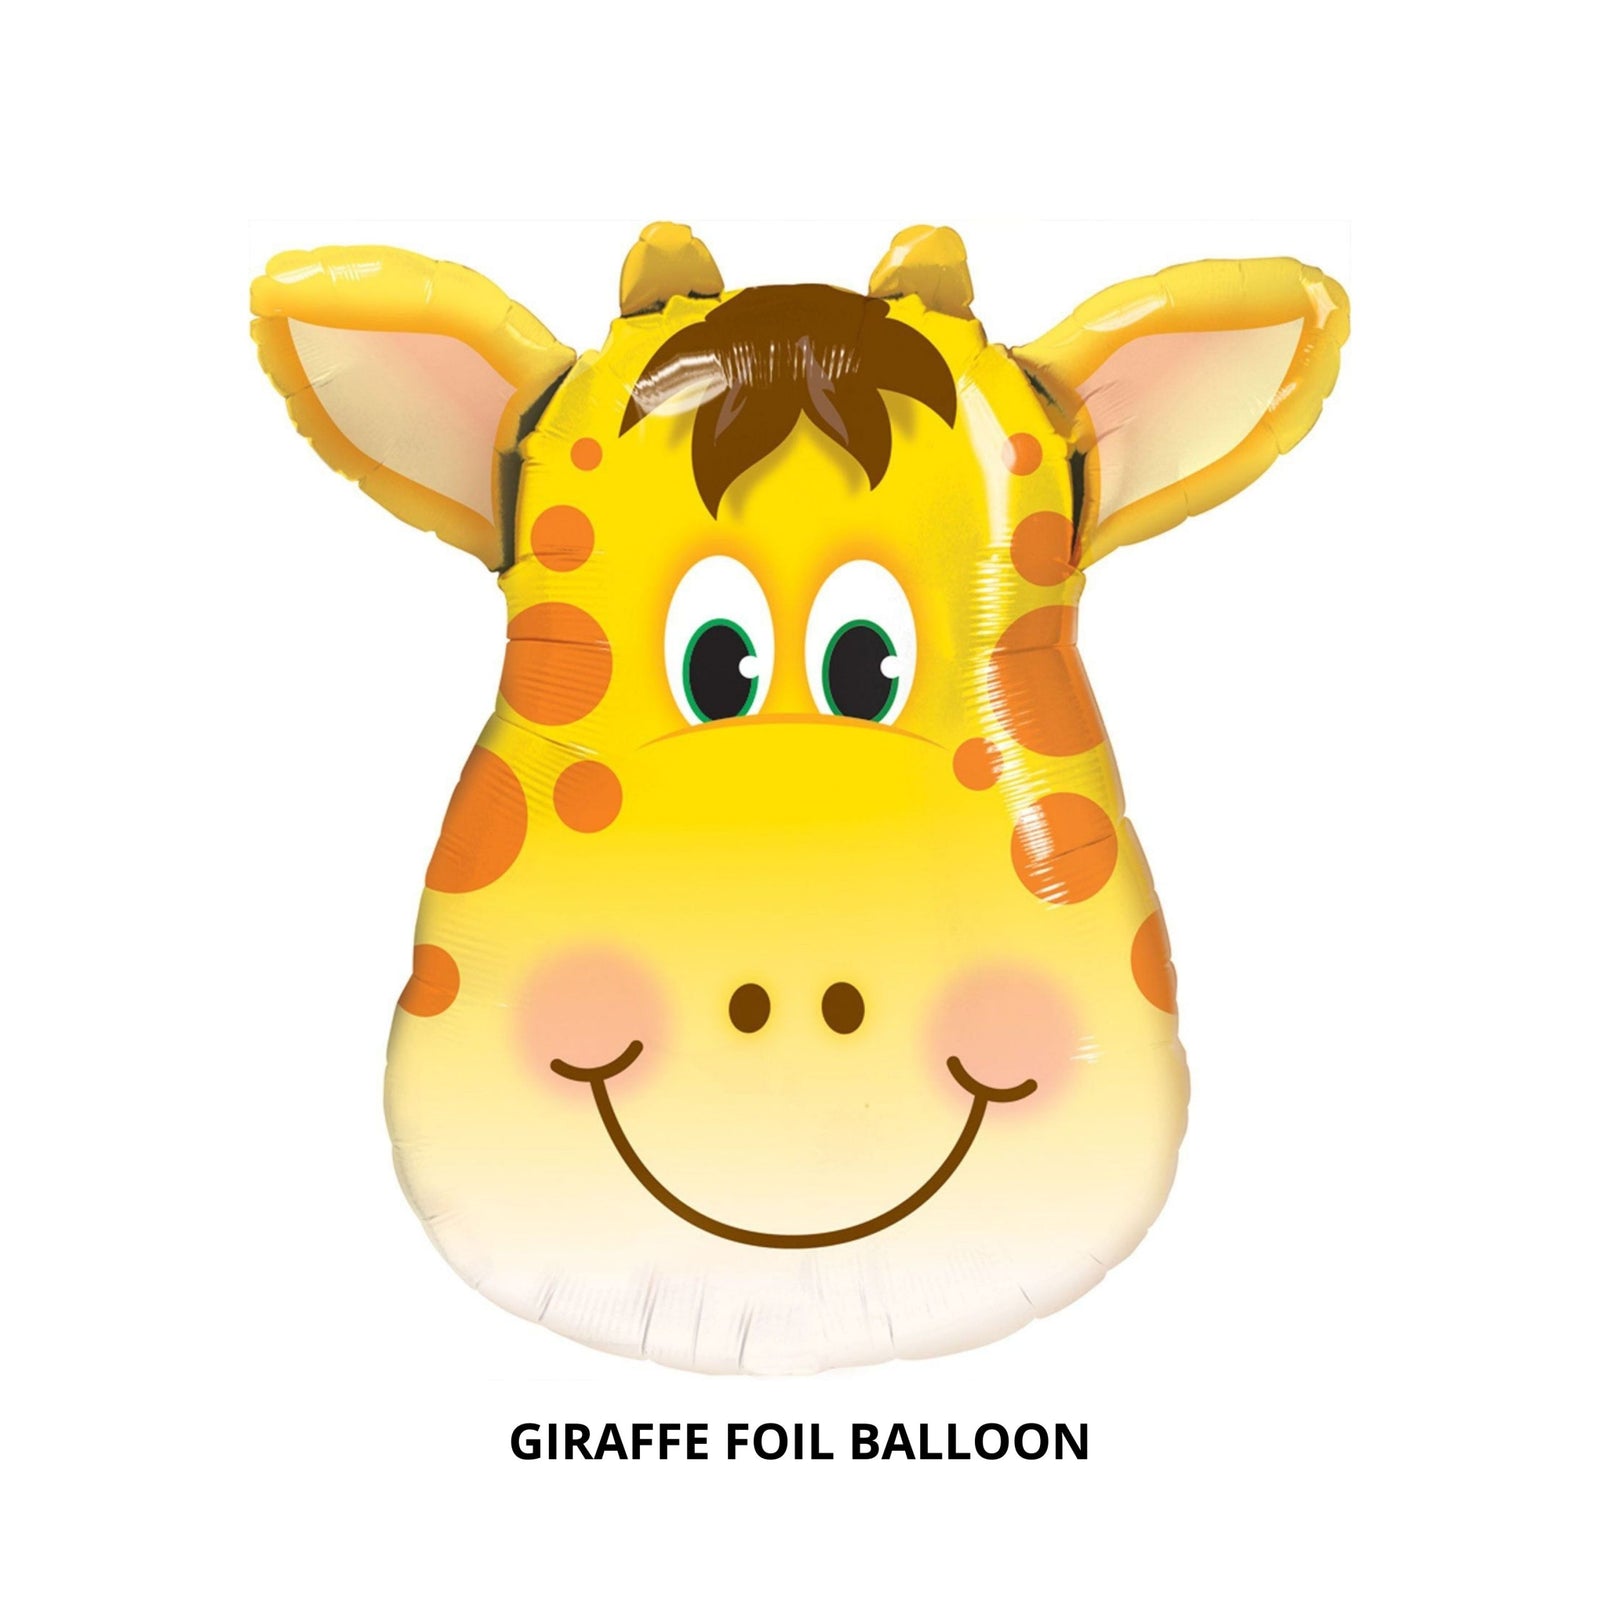 Animal Face Shaped Foil Balloon for Kids Birthday Party, Animal Theme, Zoo Party Decoration- Pack of 1 (Giraffe)